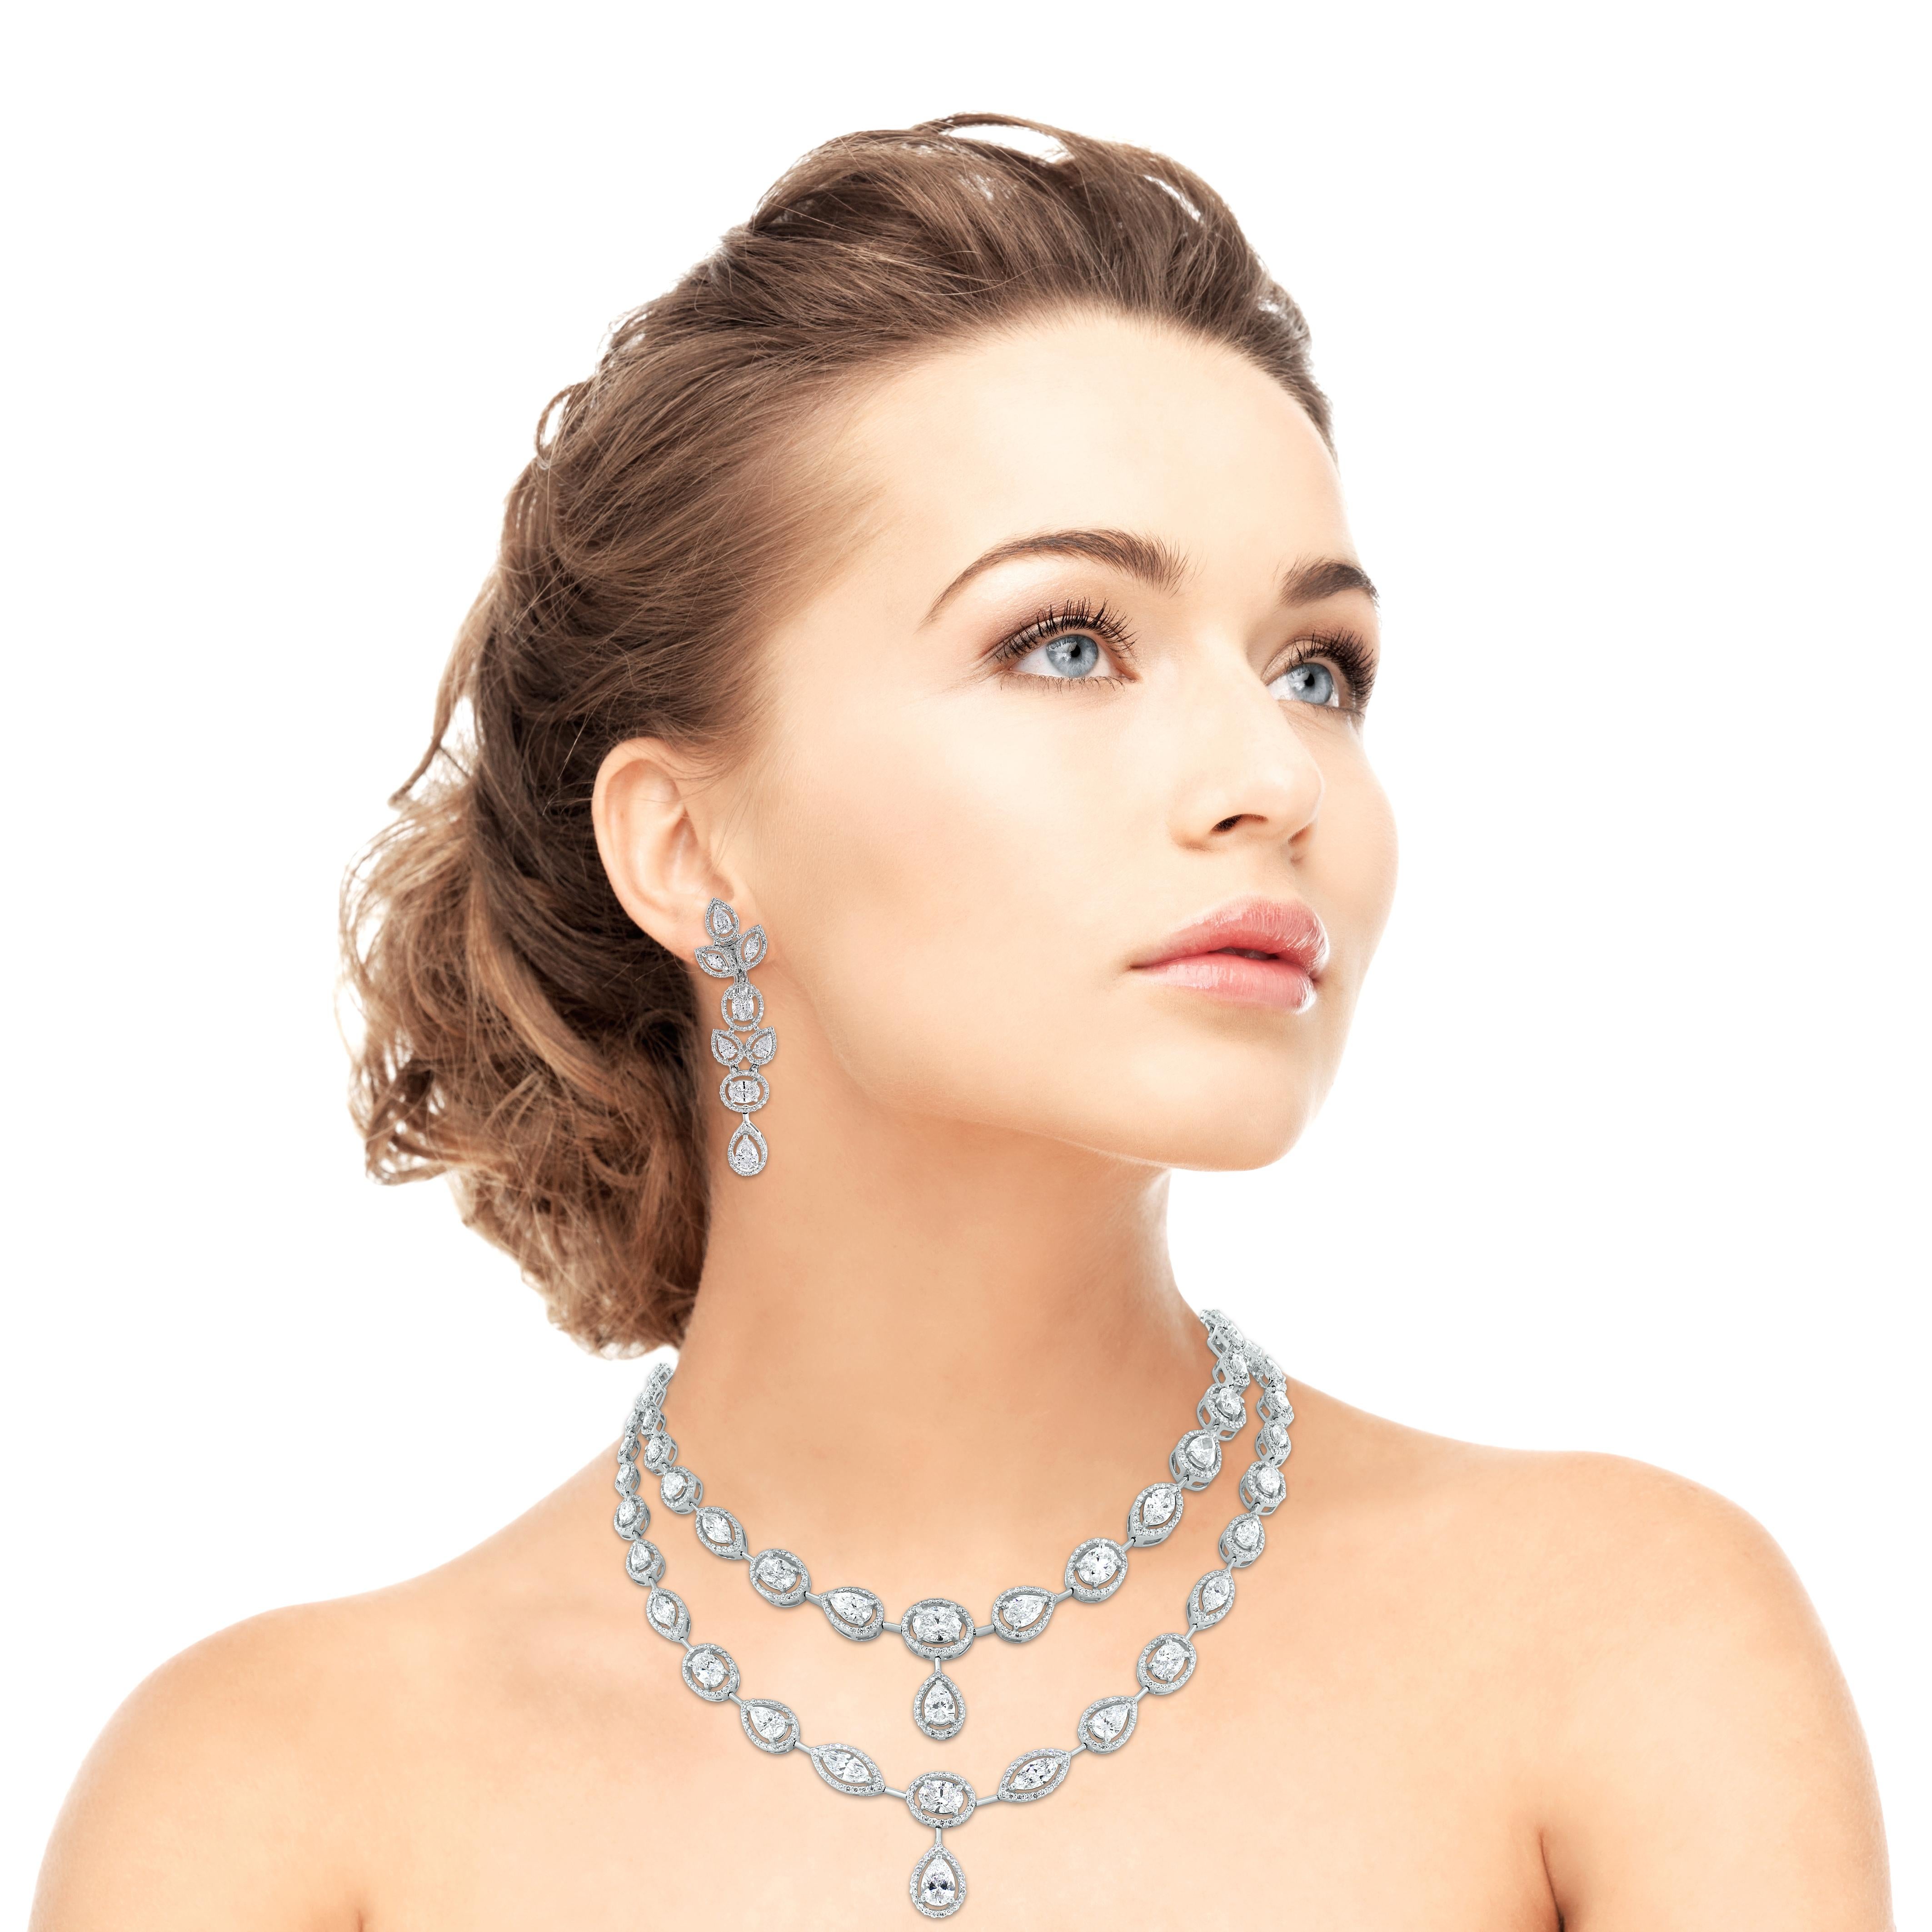 The Tara Necklace & Earrings Suite features a elegant timeless design that highlights each diamond and impresses with its simple yet stated style. Its bold earrings bring attention 

Diamonds Shapes: Pear Shape, Oval, Marquise & Round 
Total